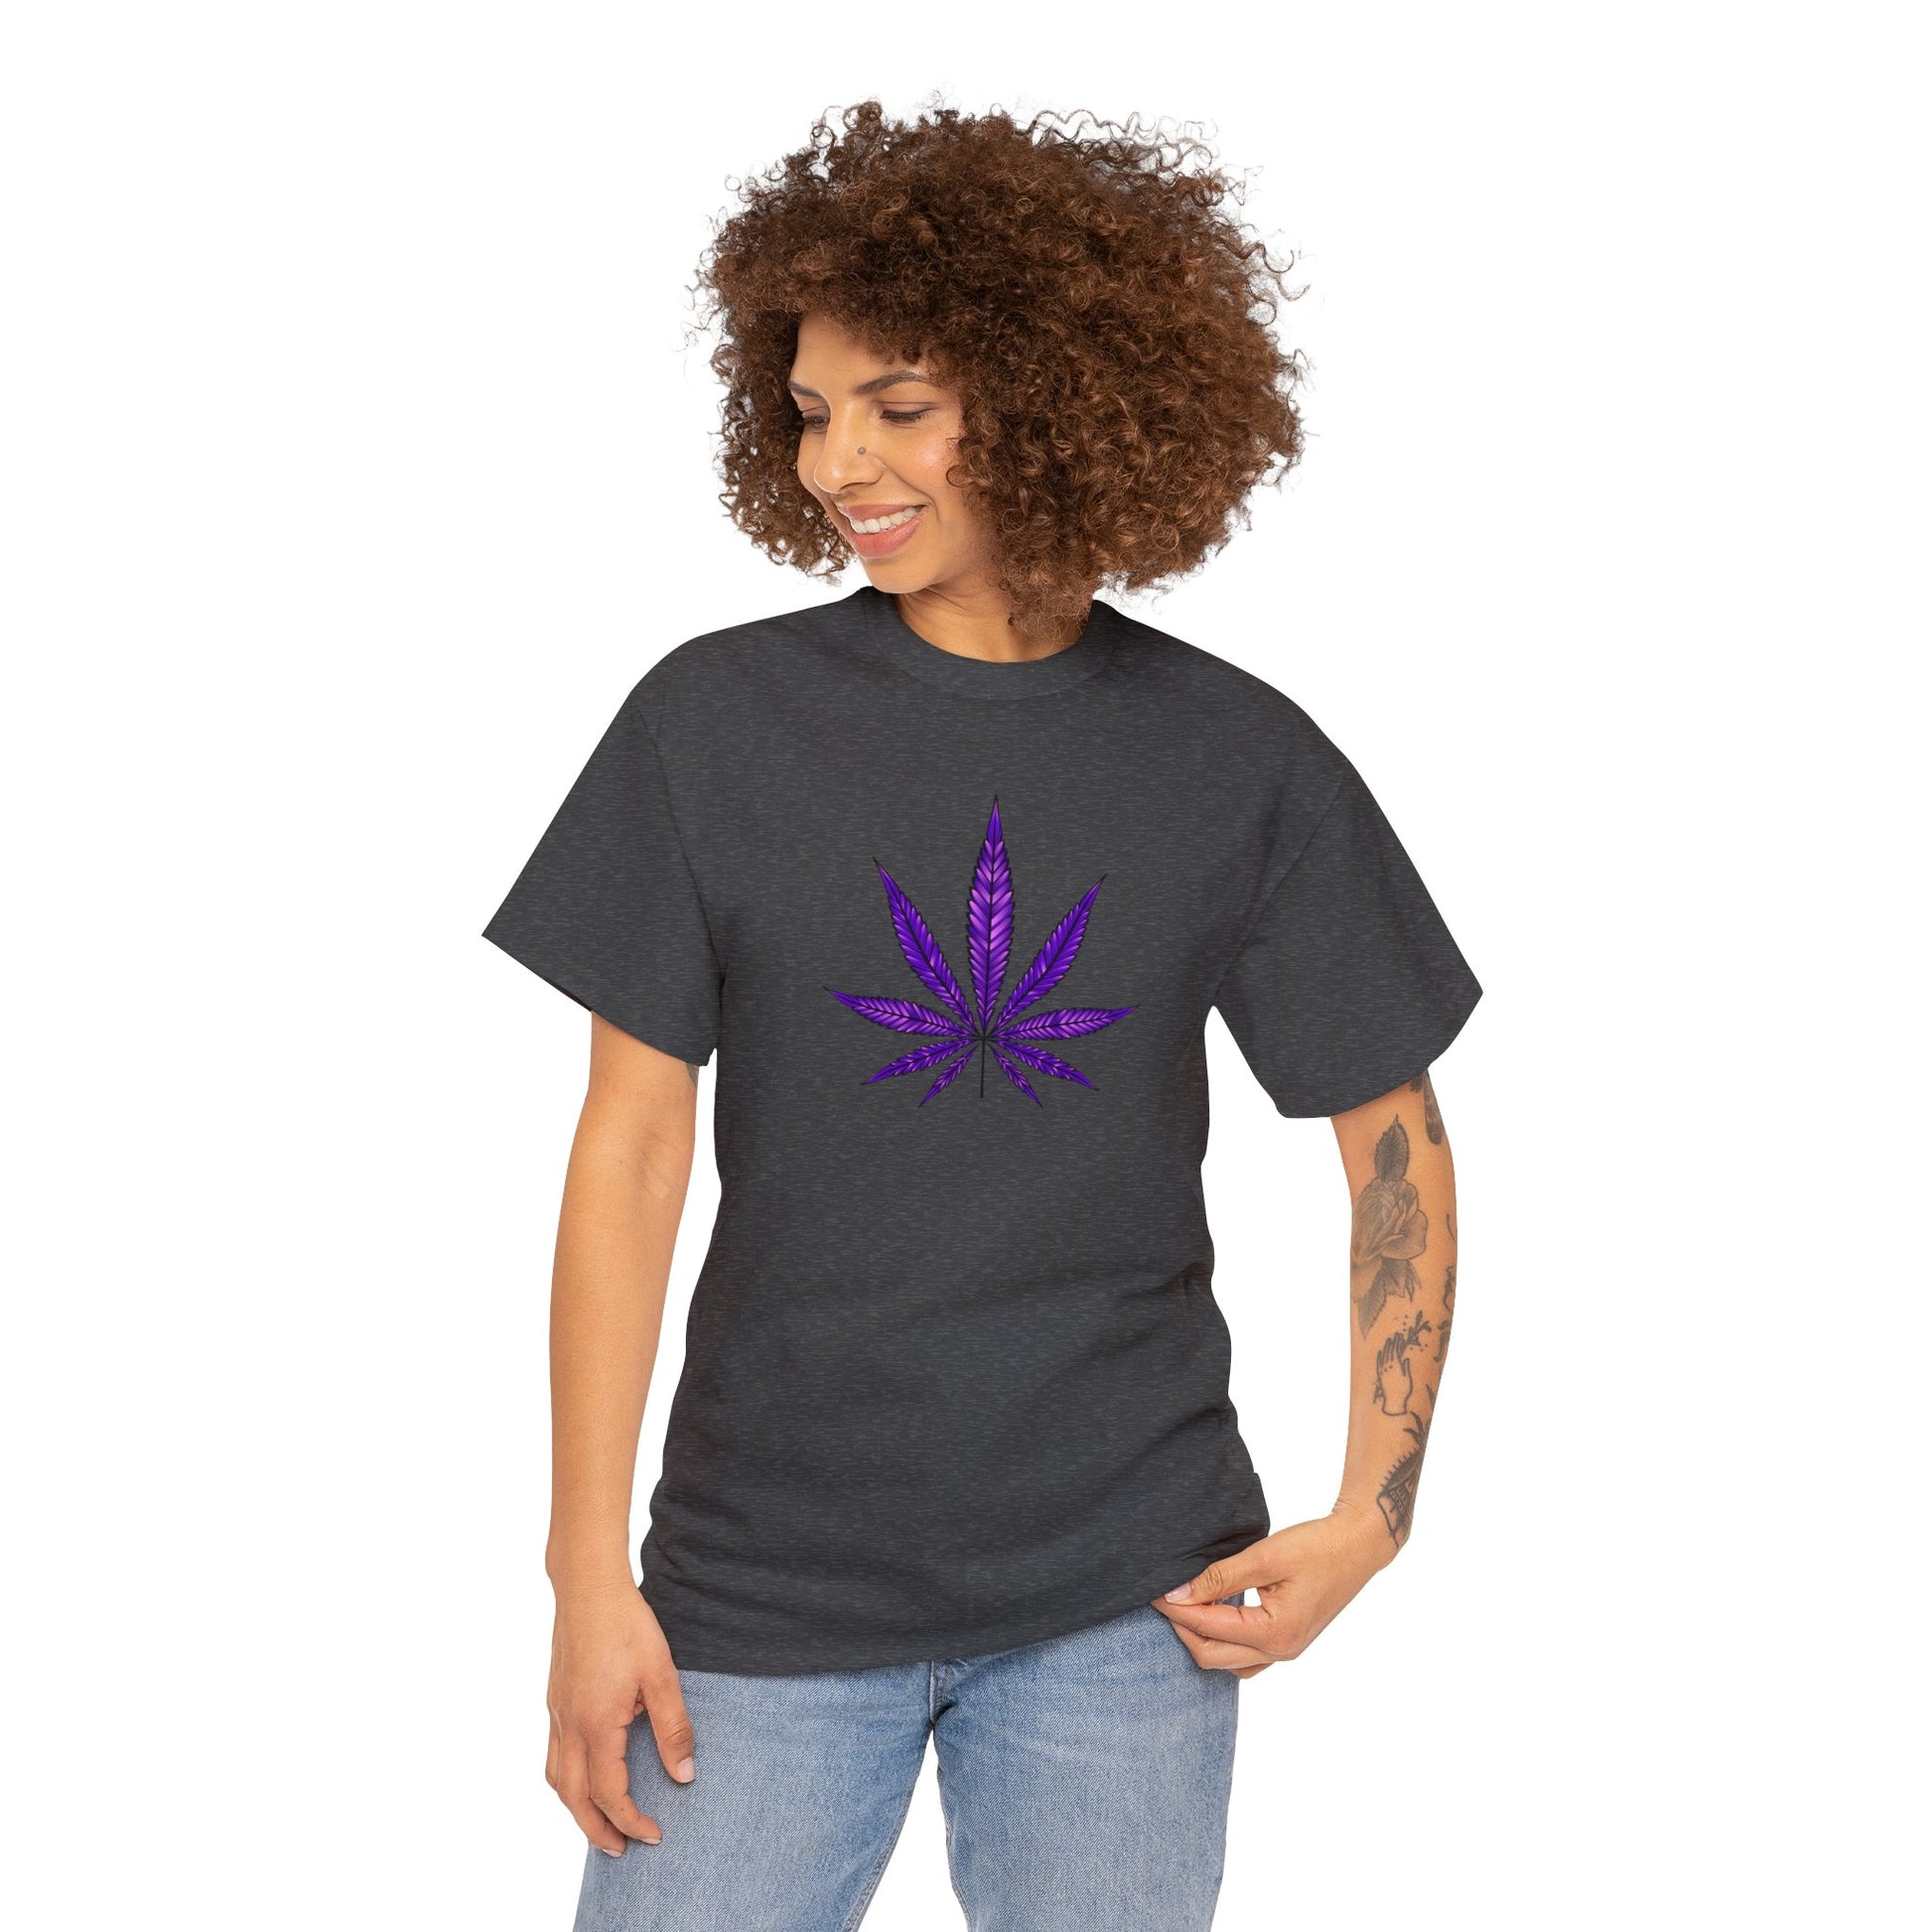 A person wearing a dark gray Purple Cannabis Leaf Tee with a vibrant purple cannabis leaf design on the front.